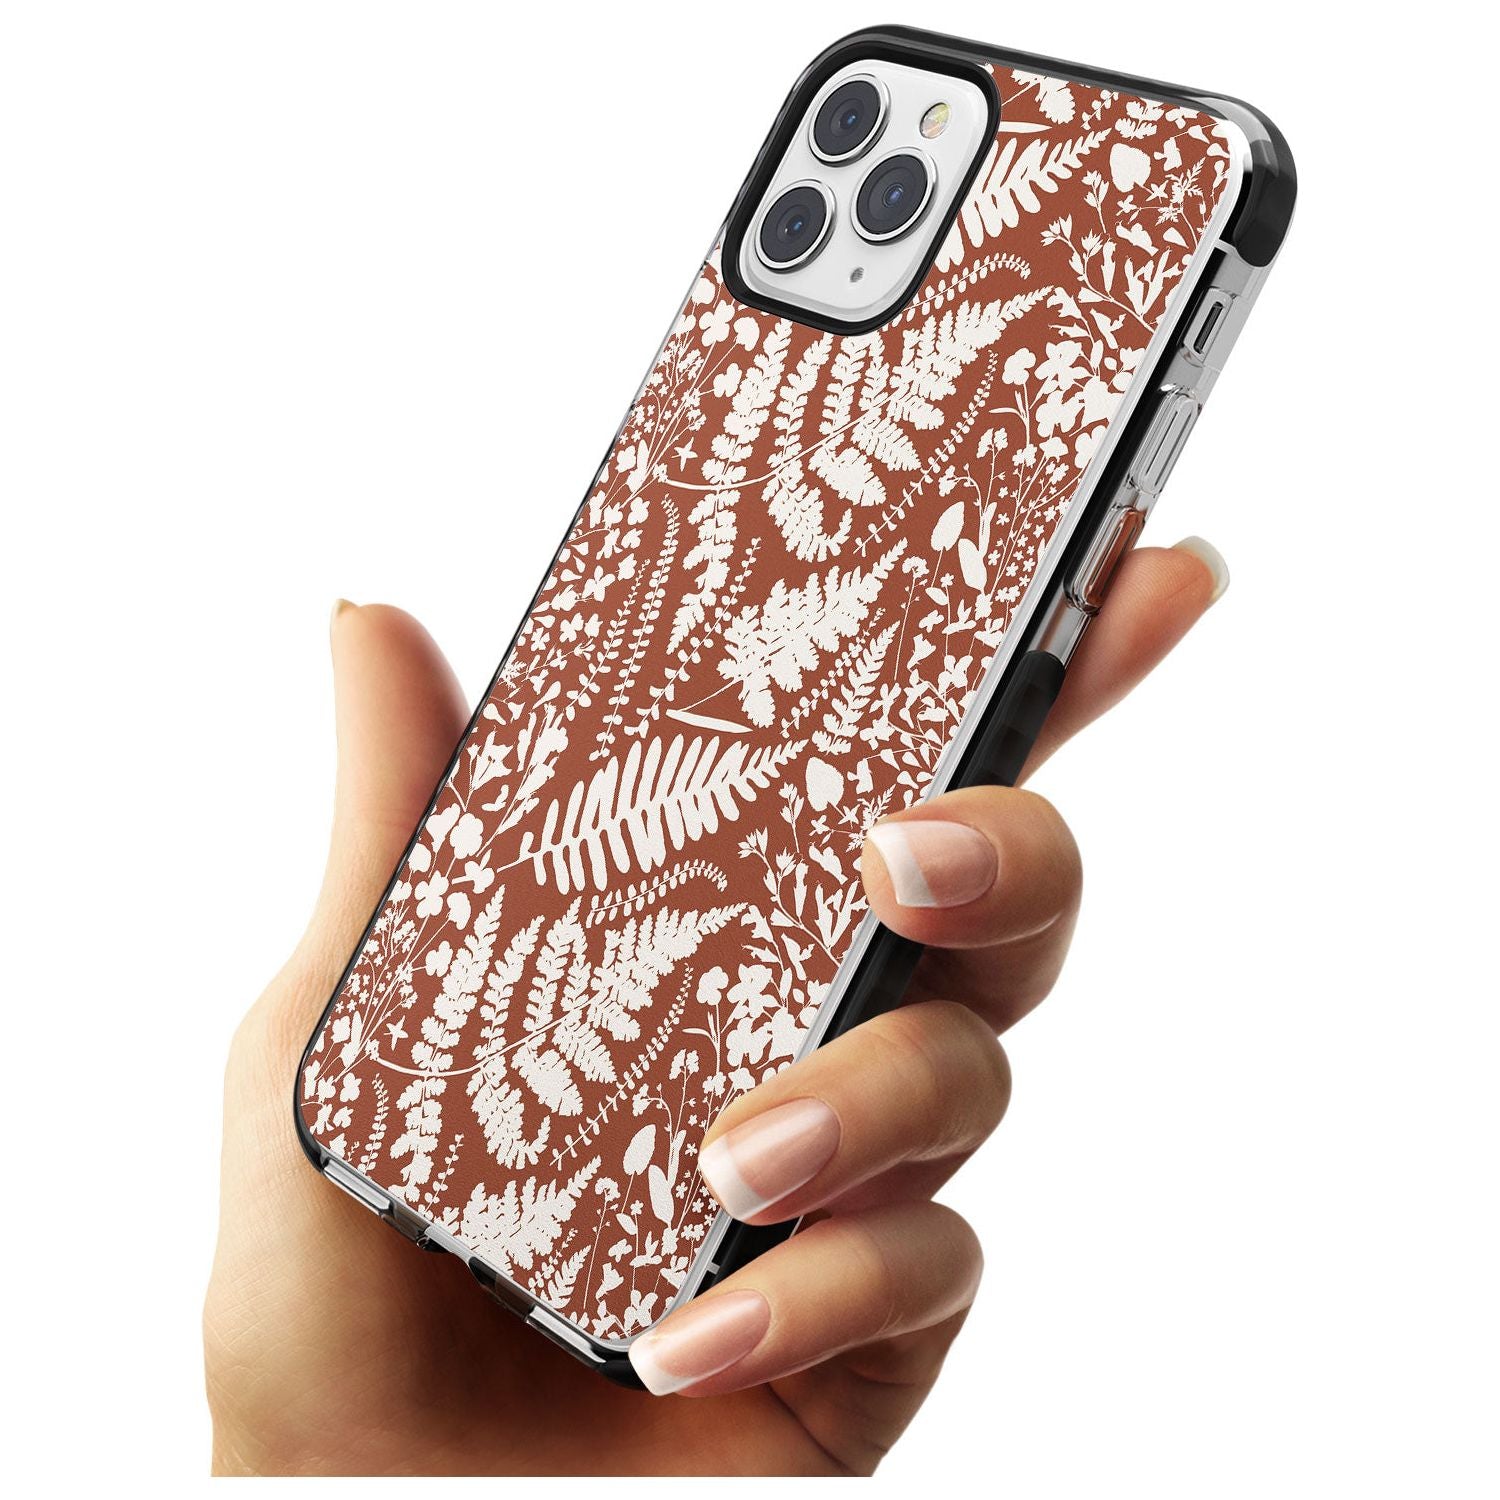 Wildflowers and Ferns on Terracotta Black Impact Phone Case for iPhone 11 Pro Max